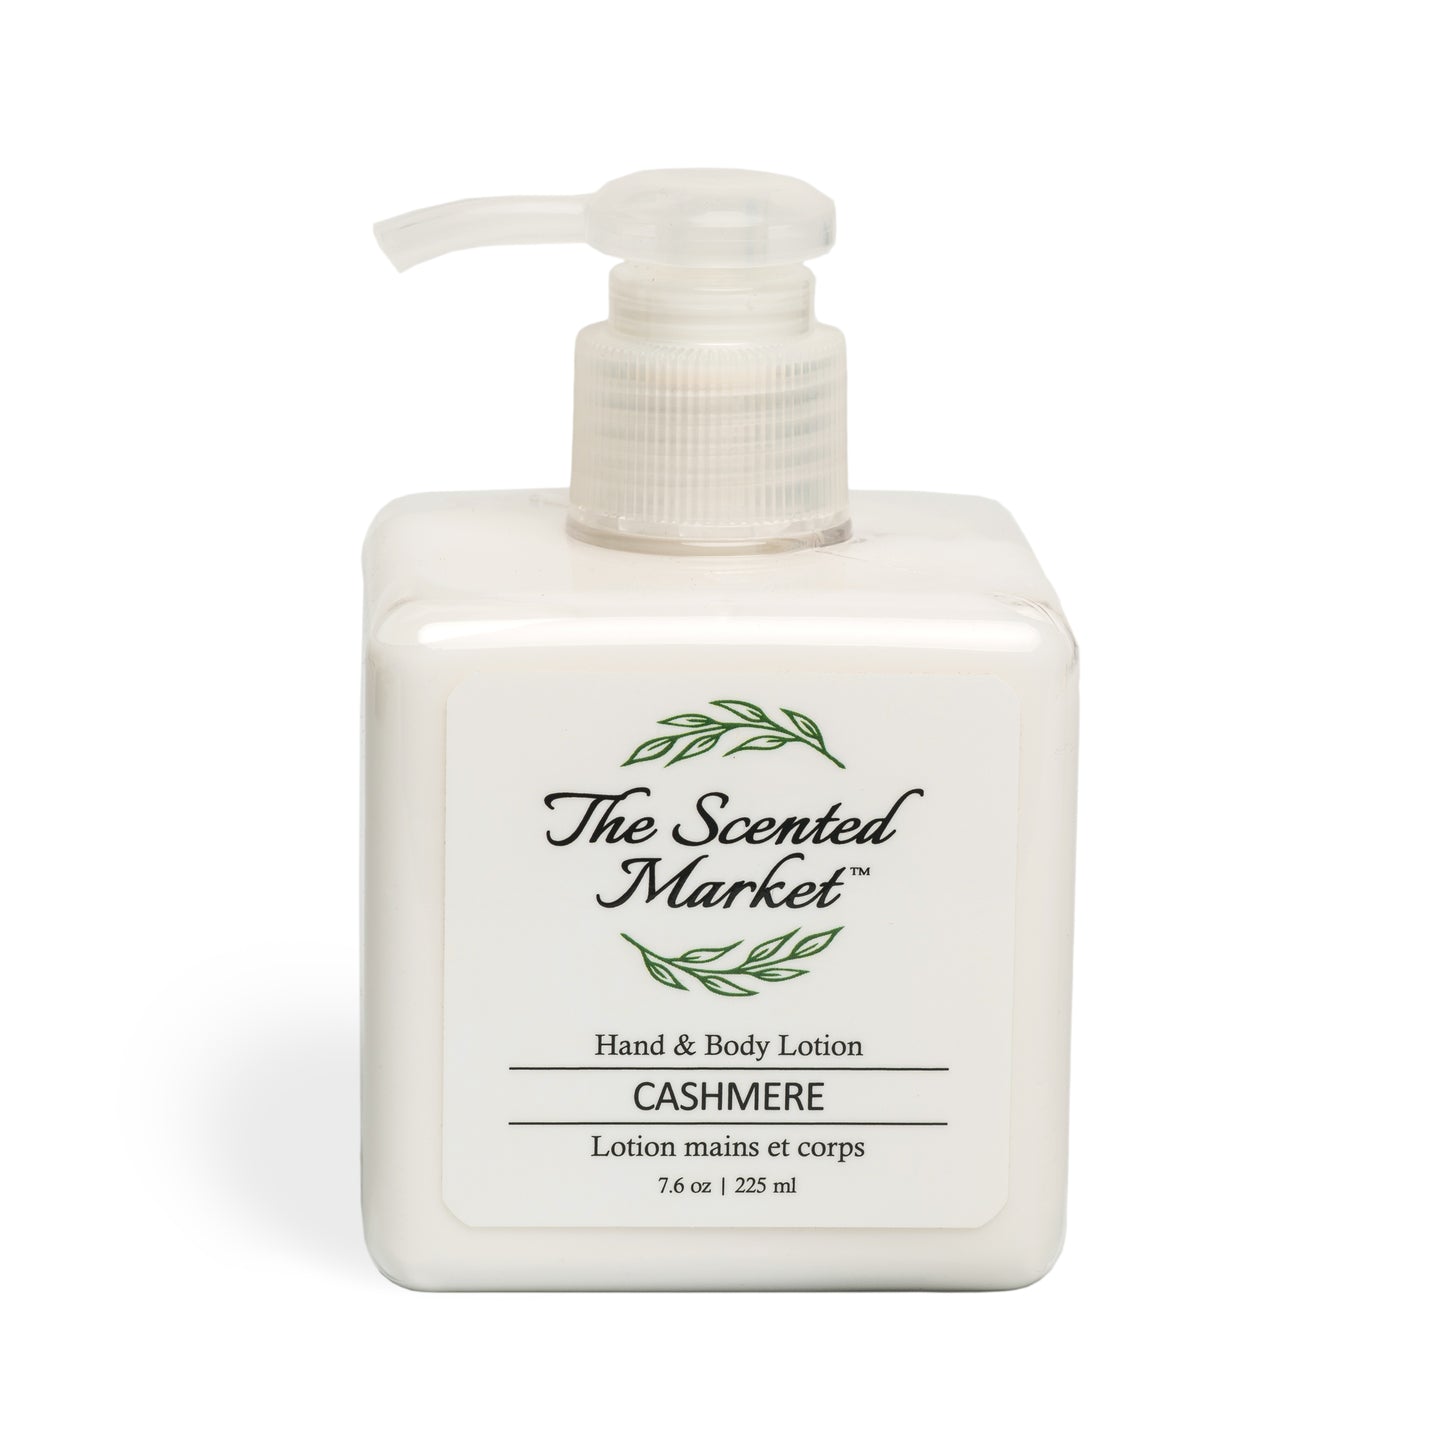 CASHMERE Hand & Body Lotion